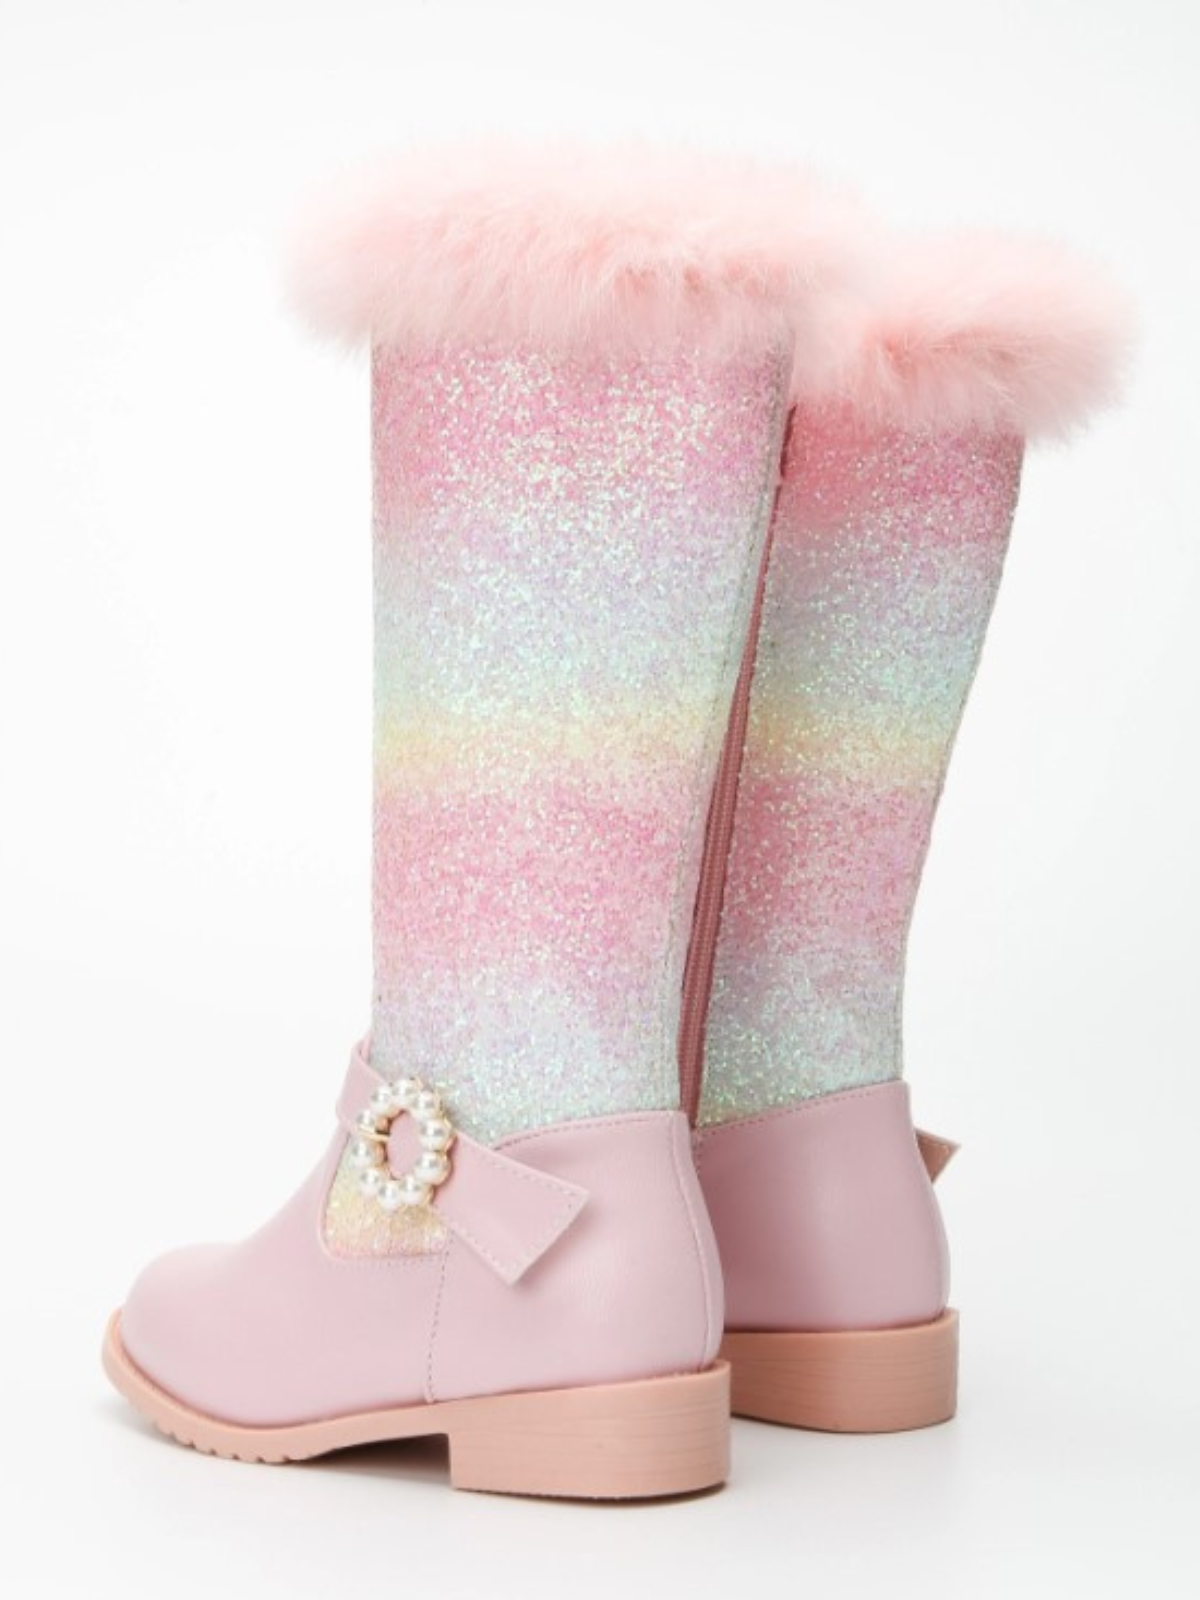 Mia Belle Girls Glitter Rainbow Boots | Shoes By Liv & Mia